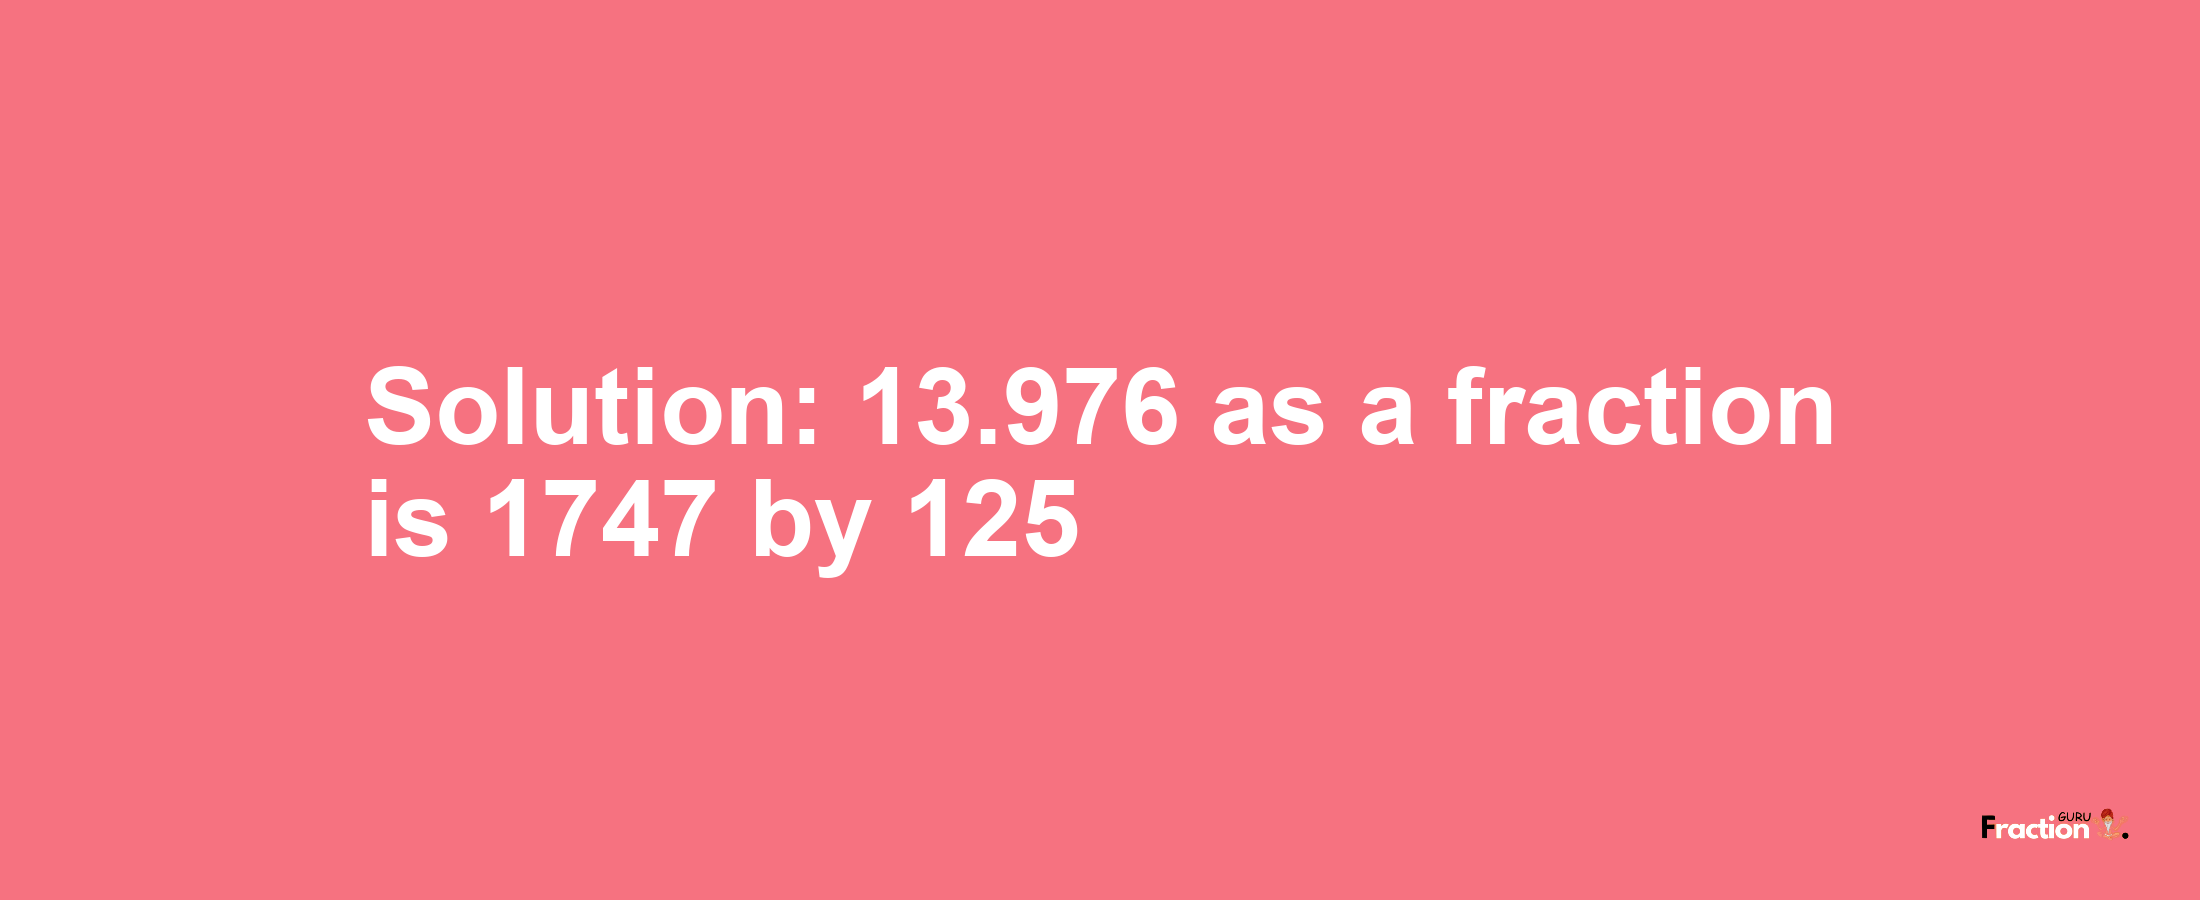 Solution:13.976 as a fraction is 1747/125